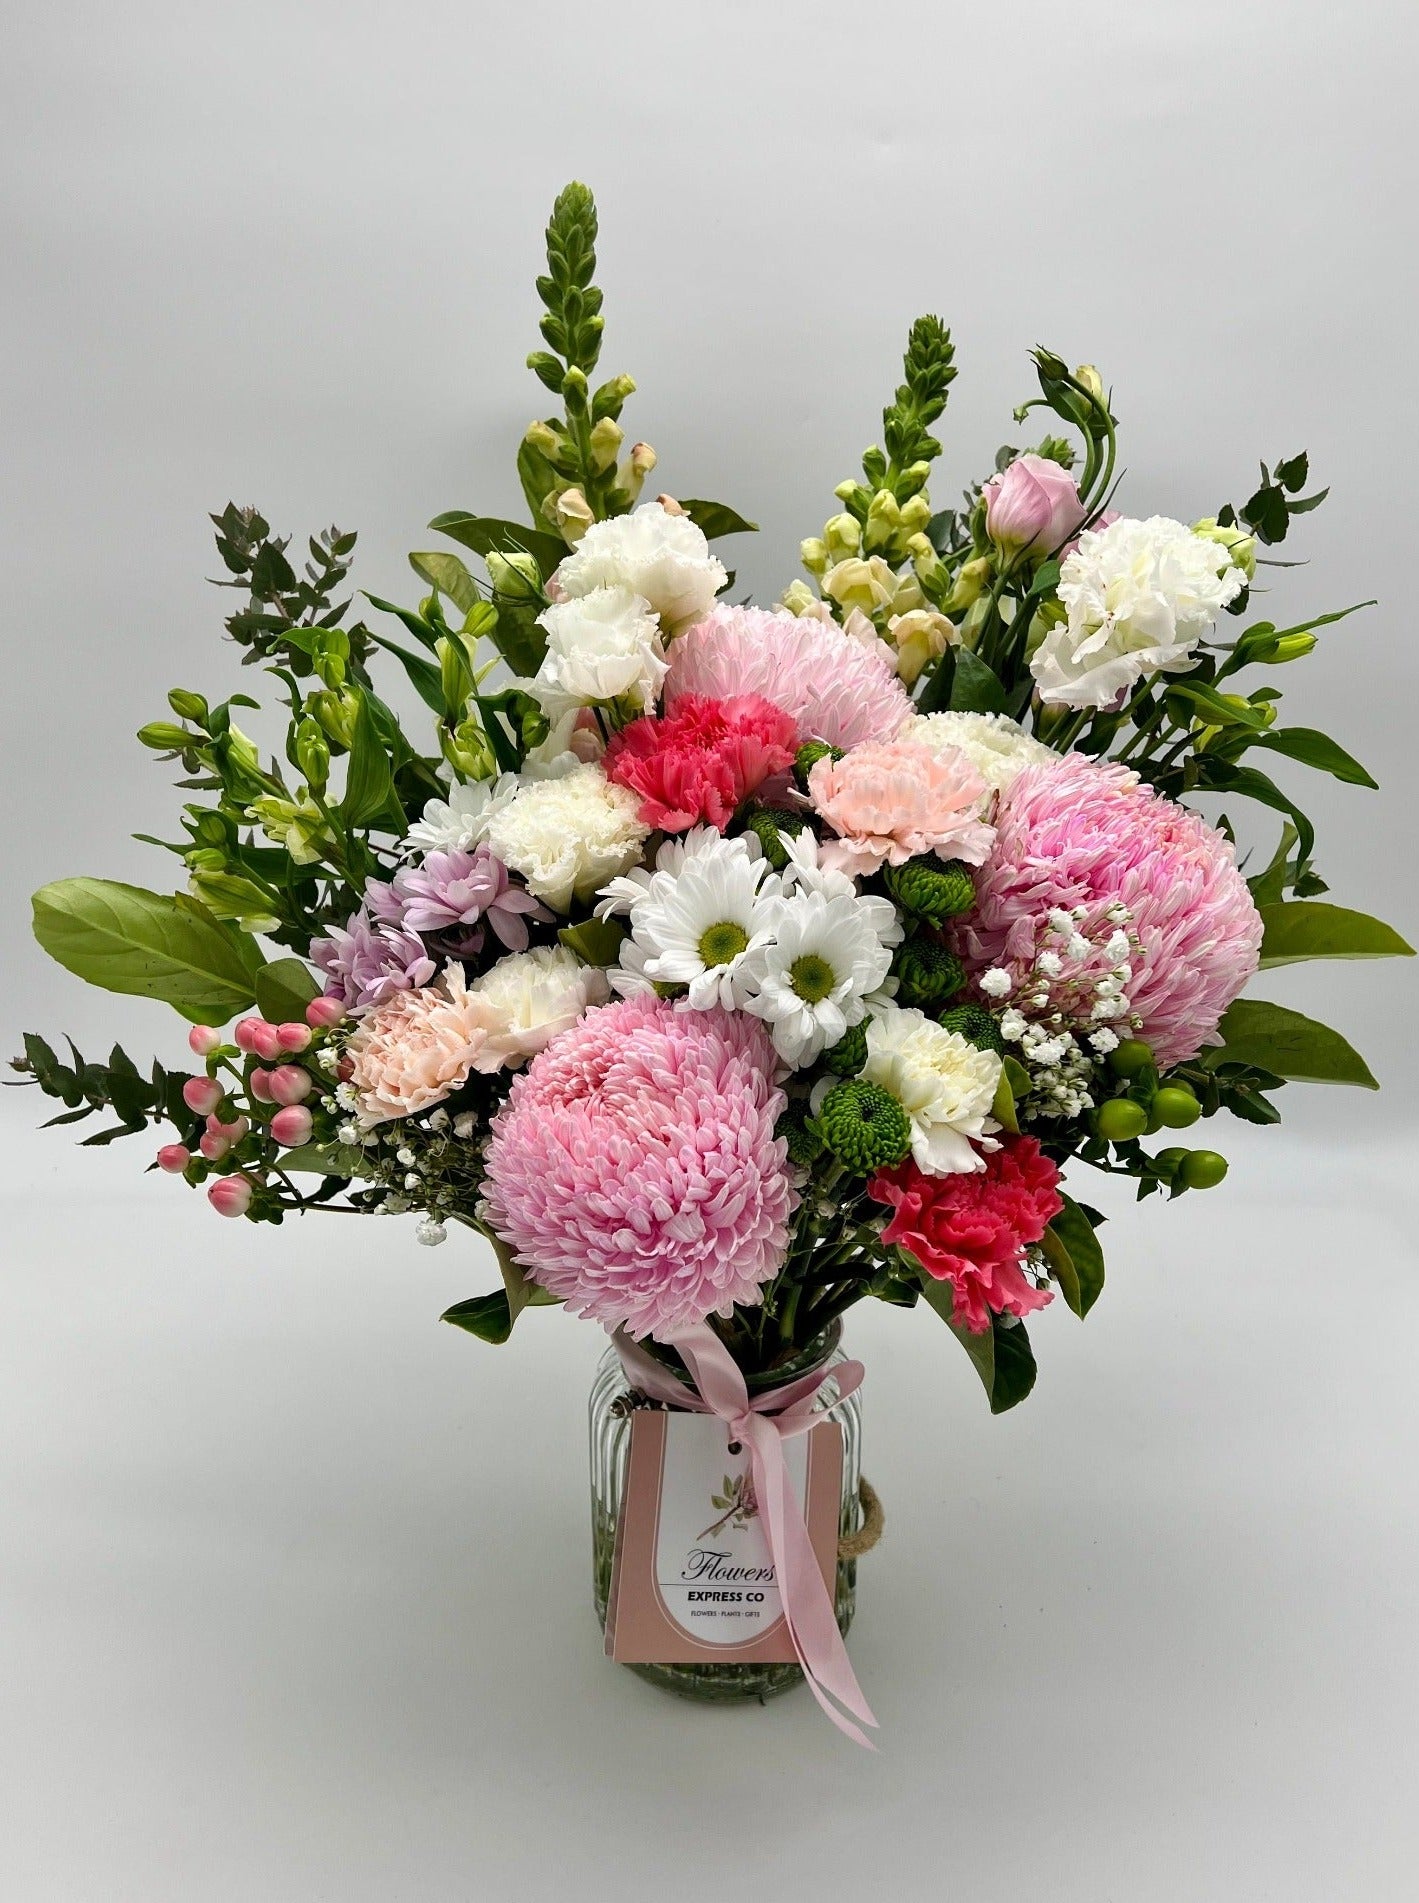 A large bouquet of fresh flowers in shades of pink and white, handcrafted in Melbourne by Flowers Express Co florists and presented in bottles.